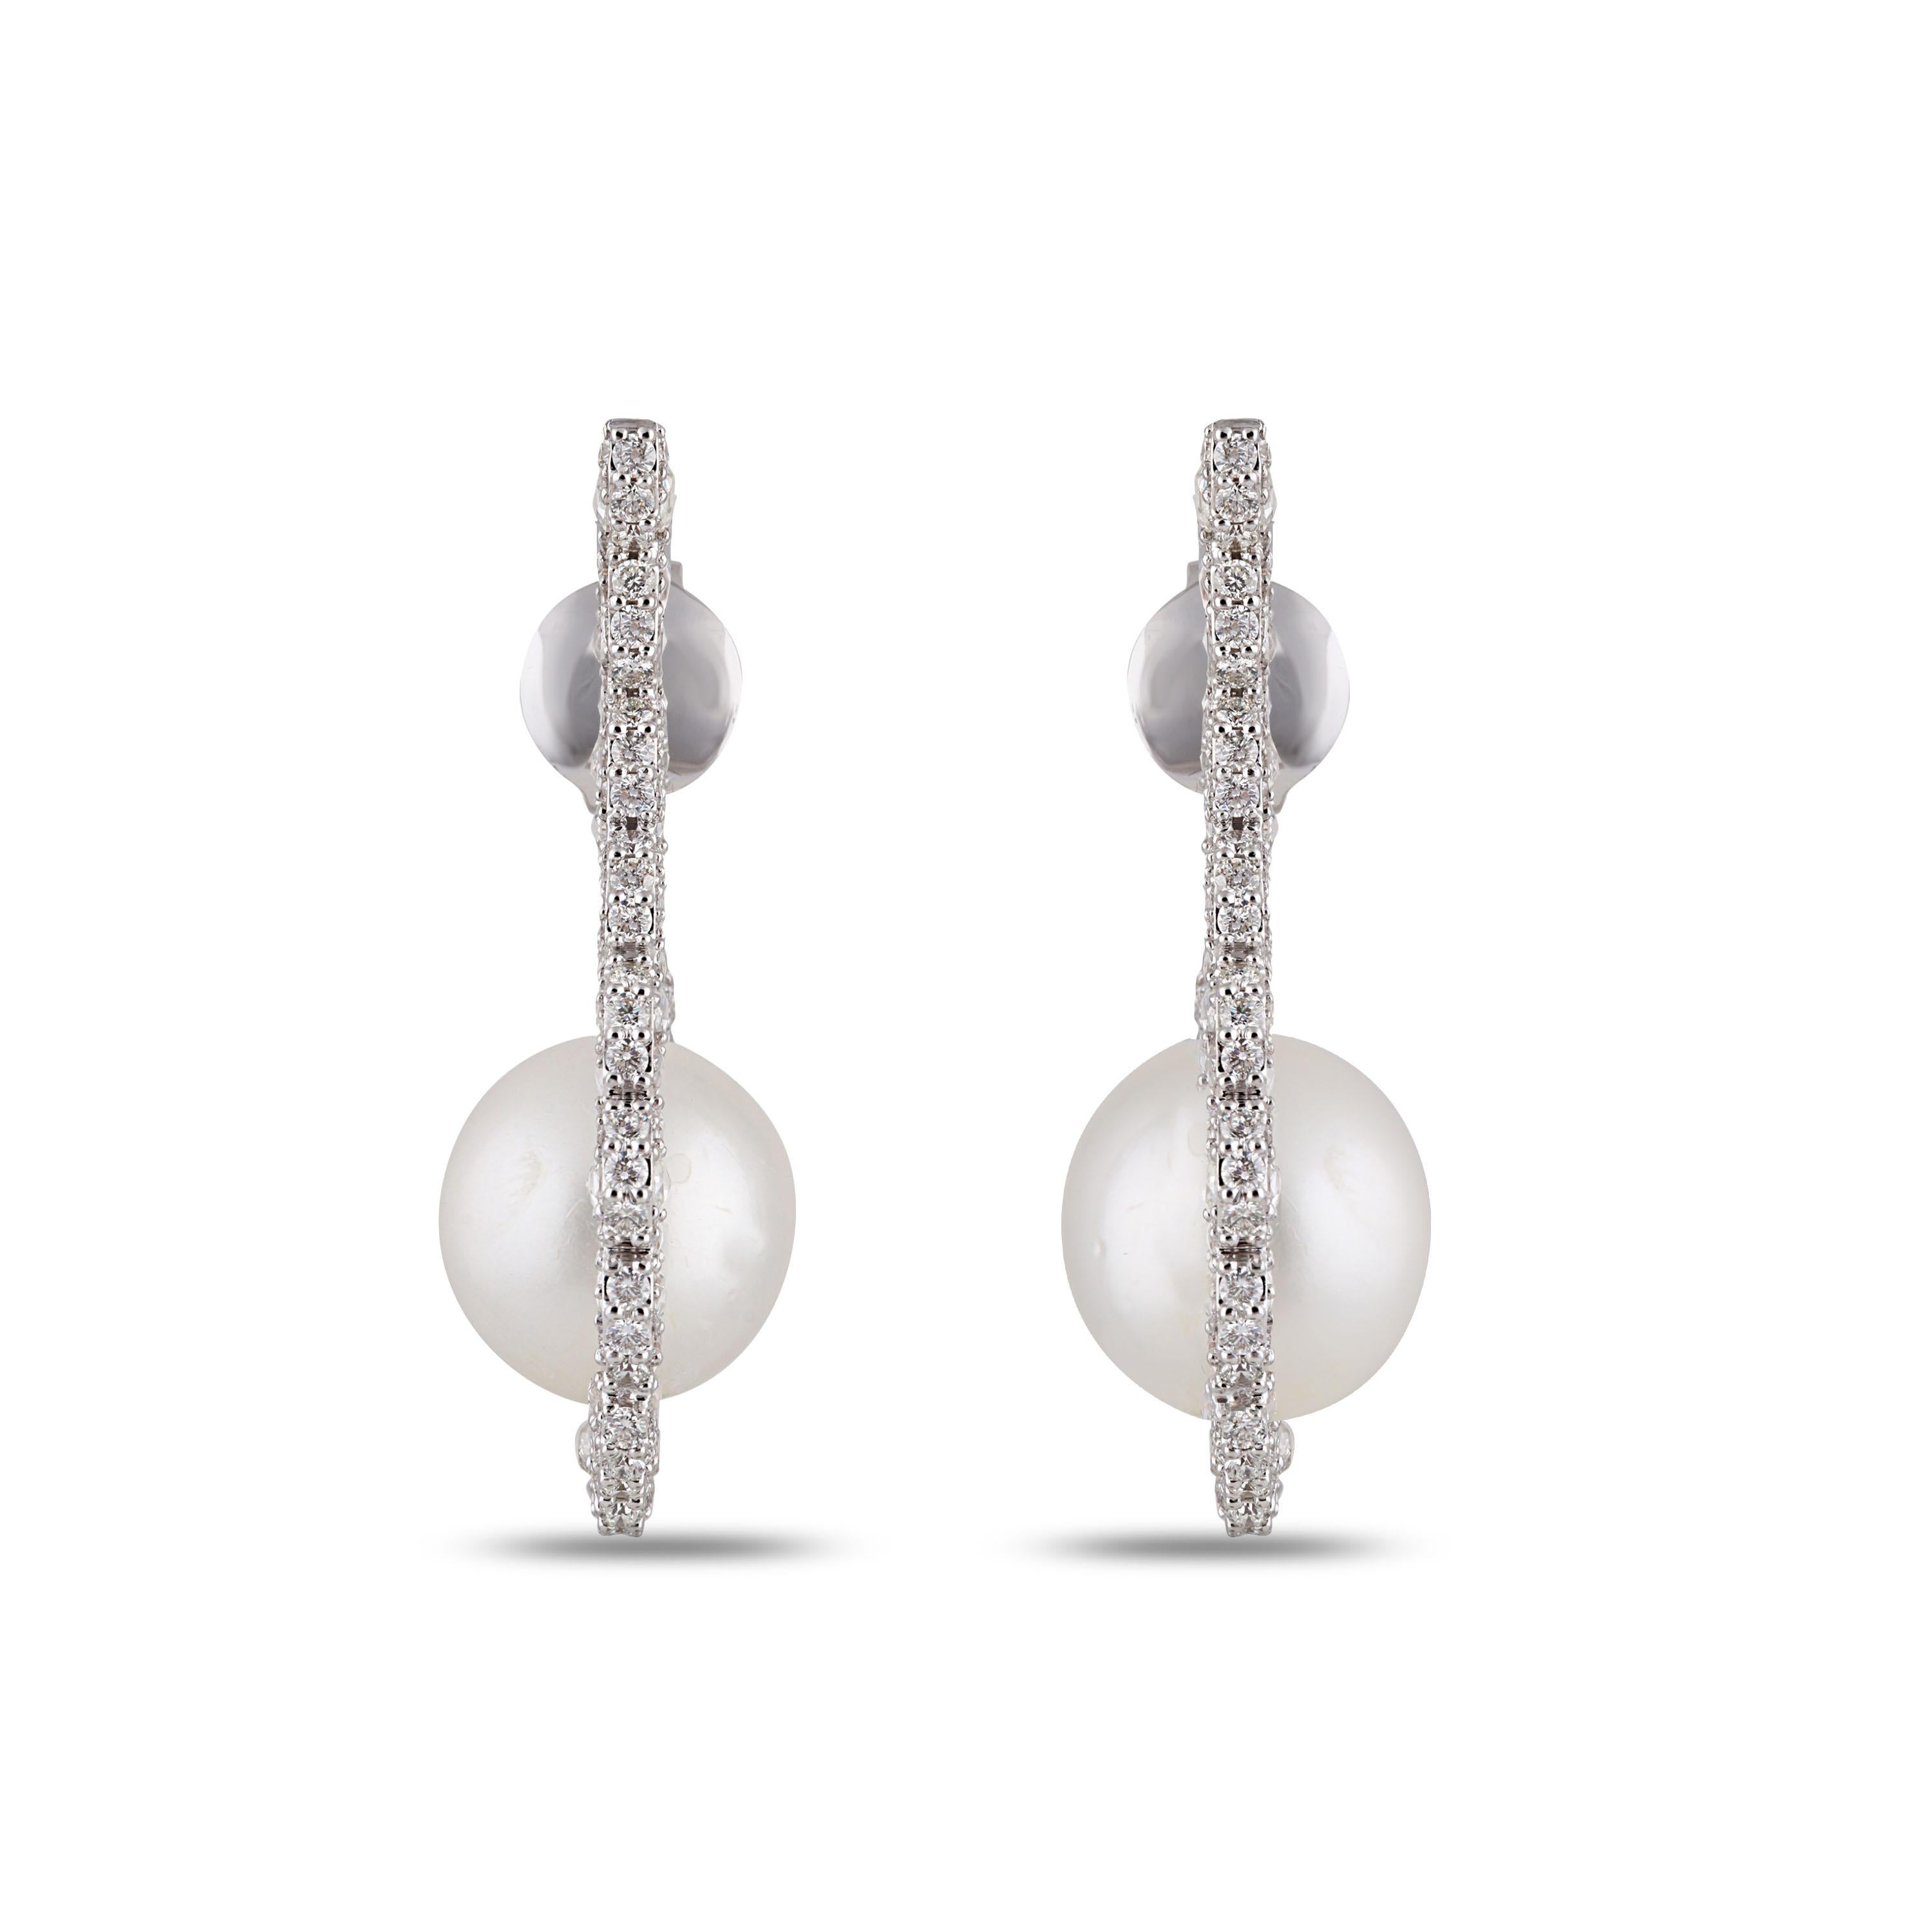 Studio Rêves Diamond and Pearl Wrap Stud Earrings in 18 Karat White Gold In New Condition For Sale In Mumbai, Maharashtra